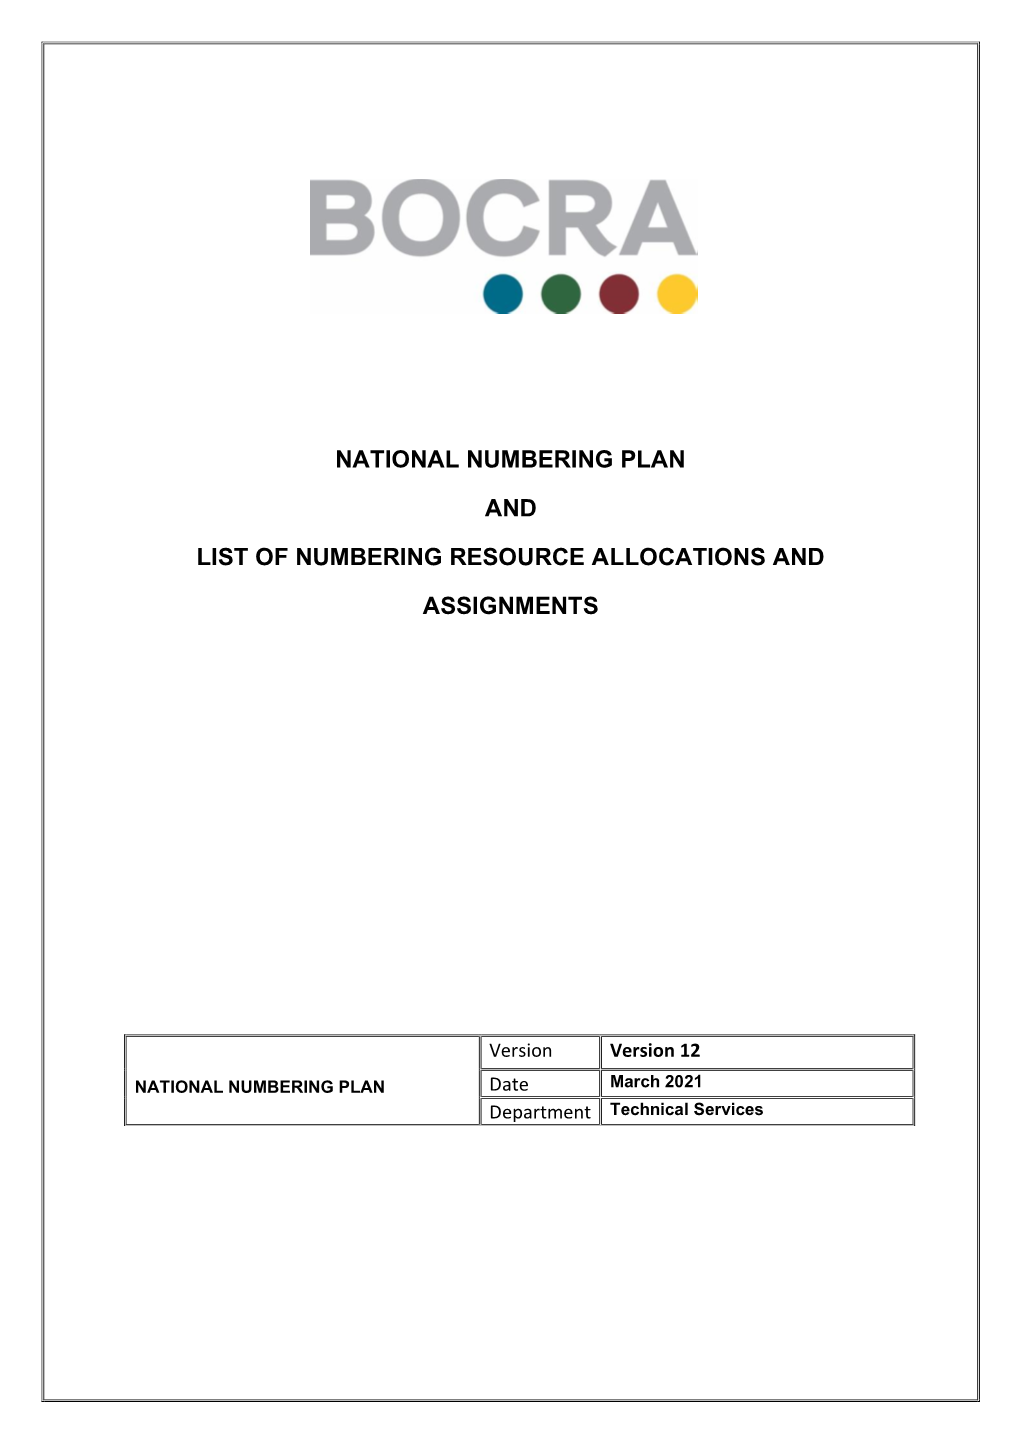 National Numbering Plan and List of Numbering Resource Allocations and Assignments